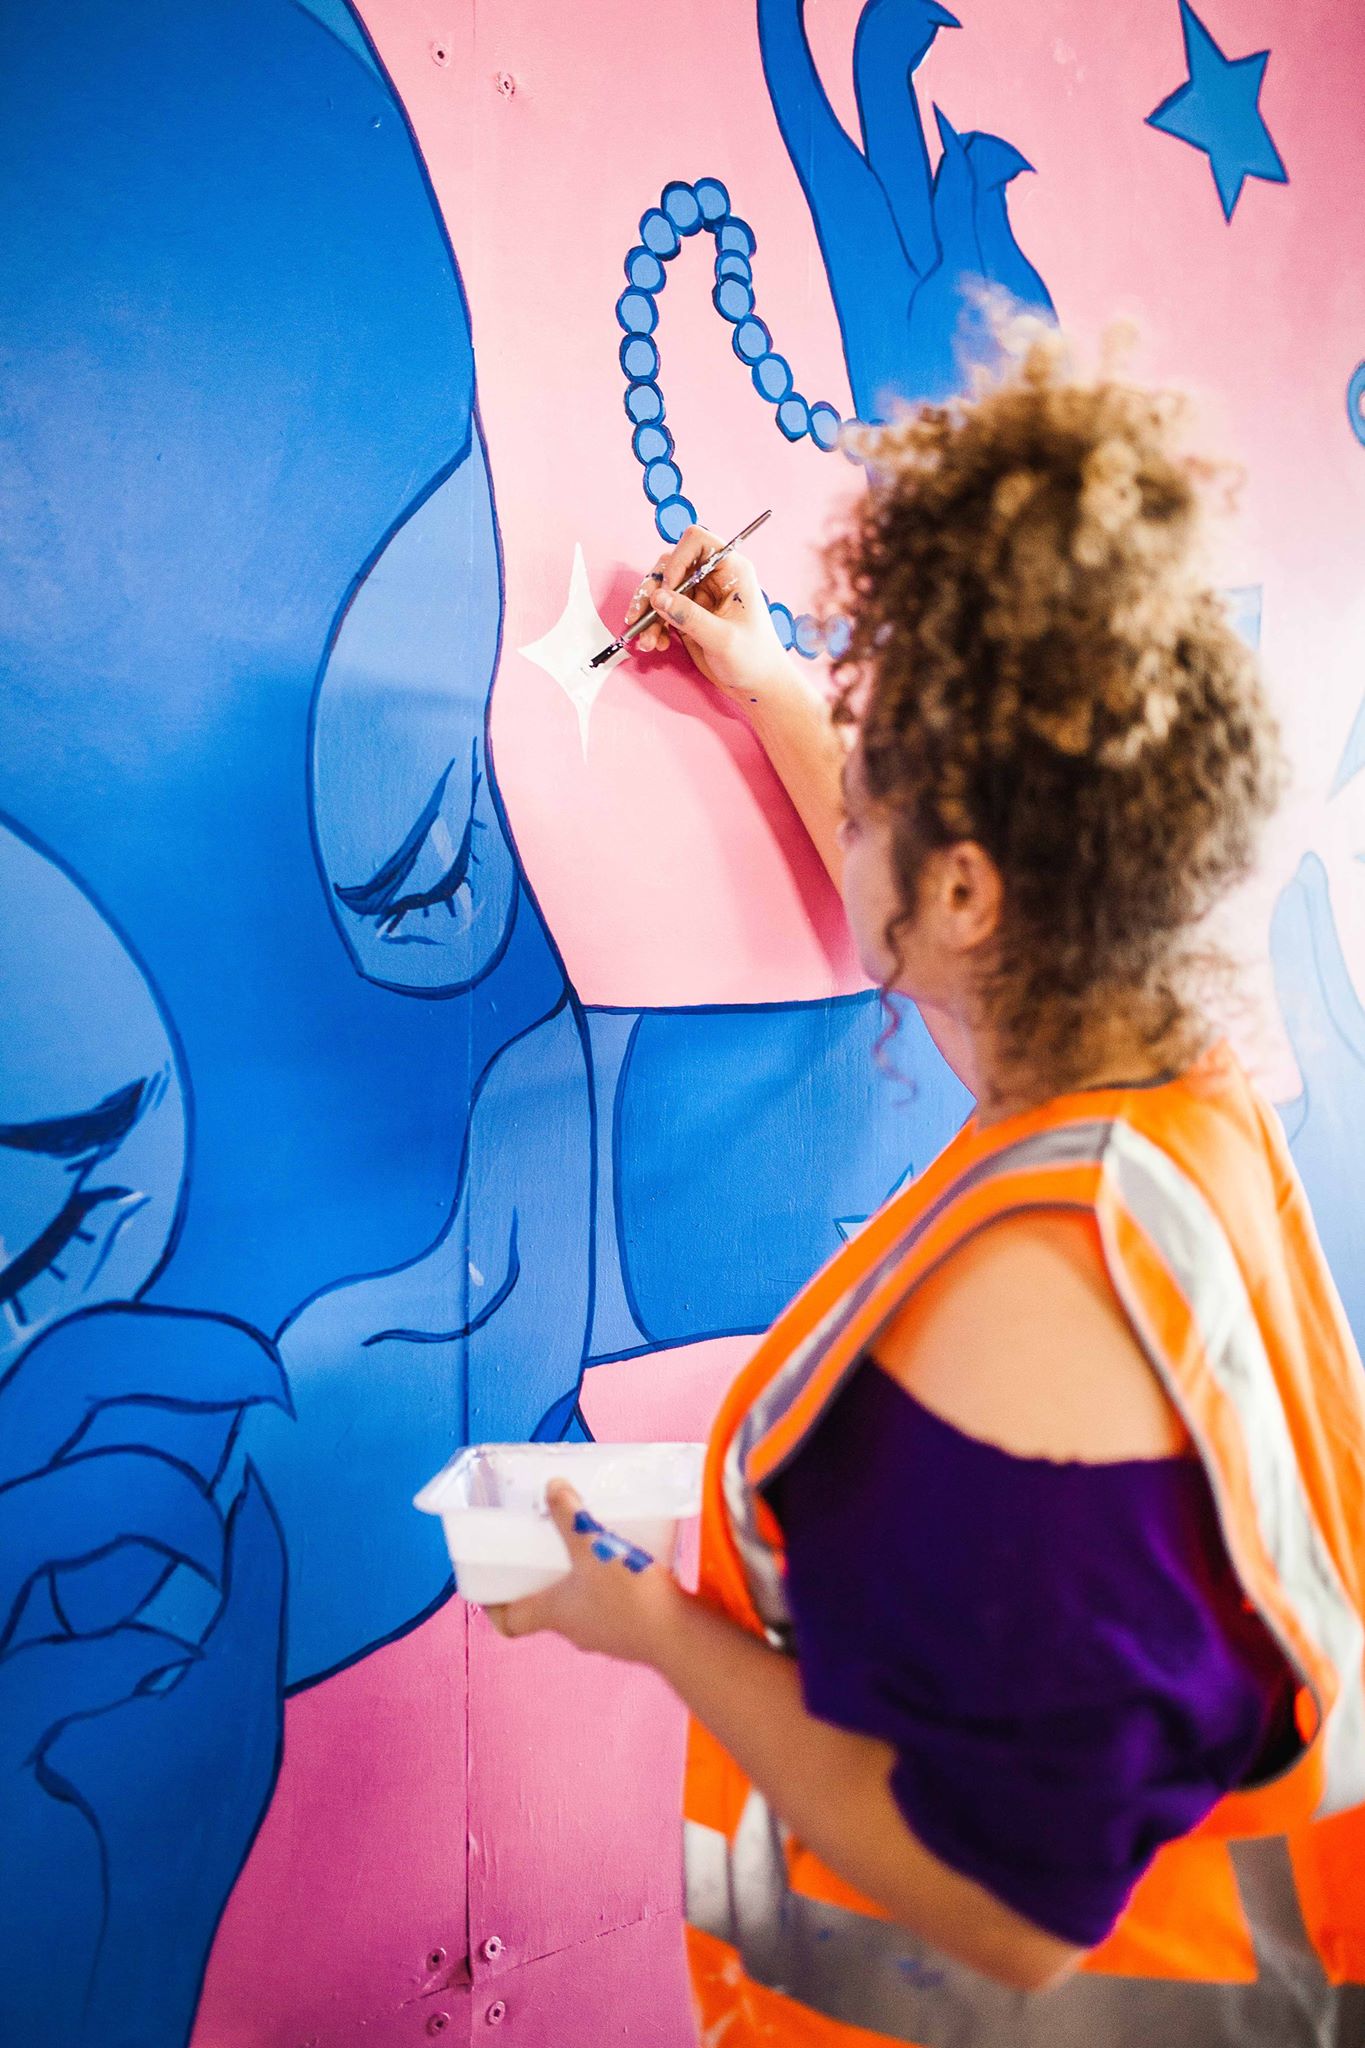 Tori-Jay Mordey wears a high vis vest and a purple shirt. She is standing side on, painting a blue and pink mural